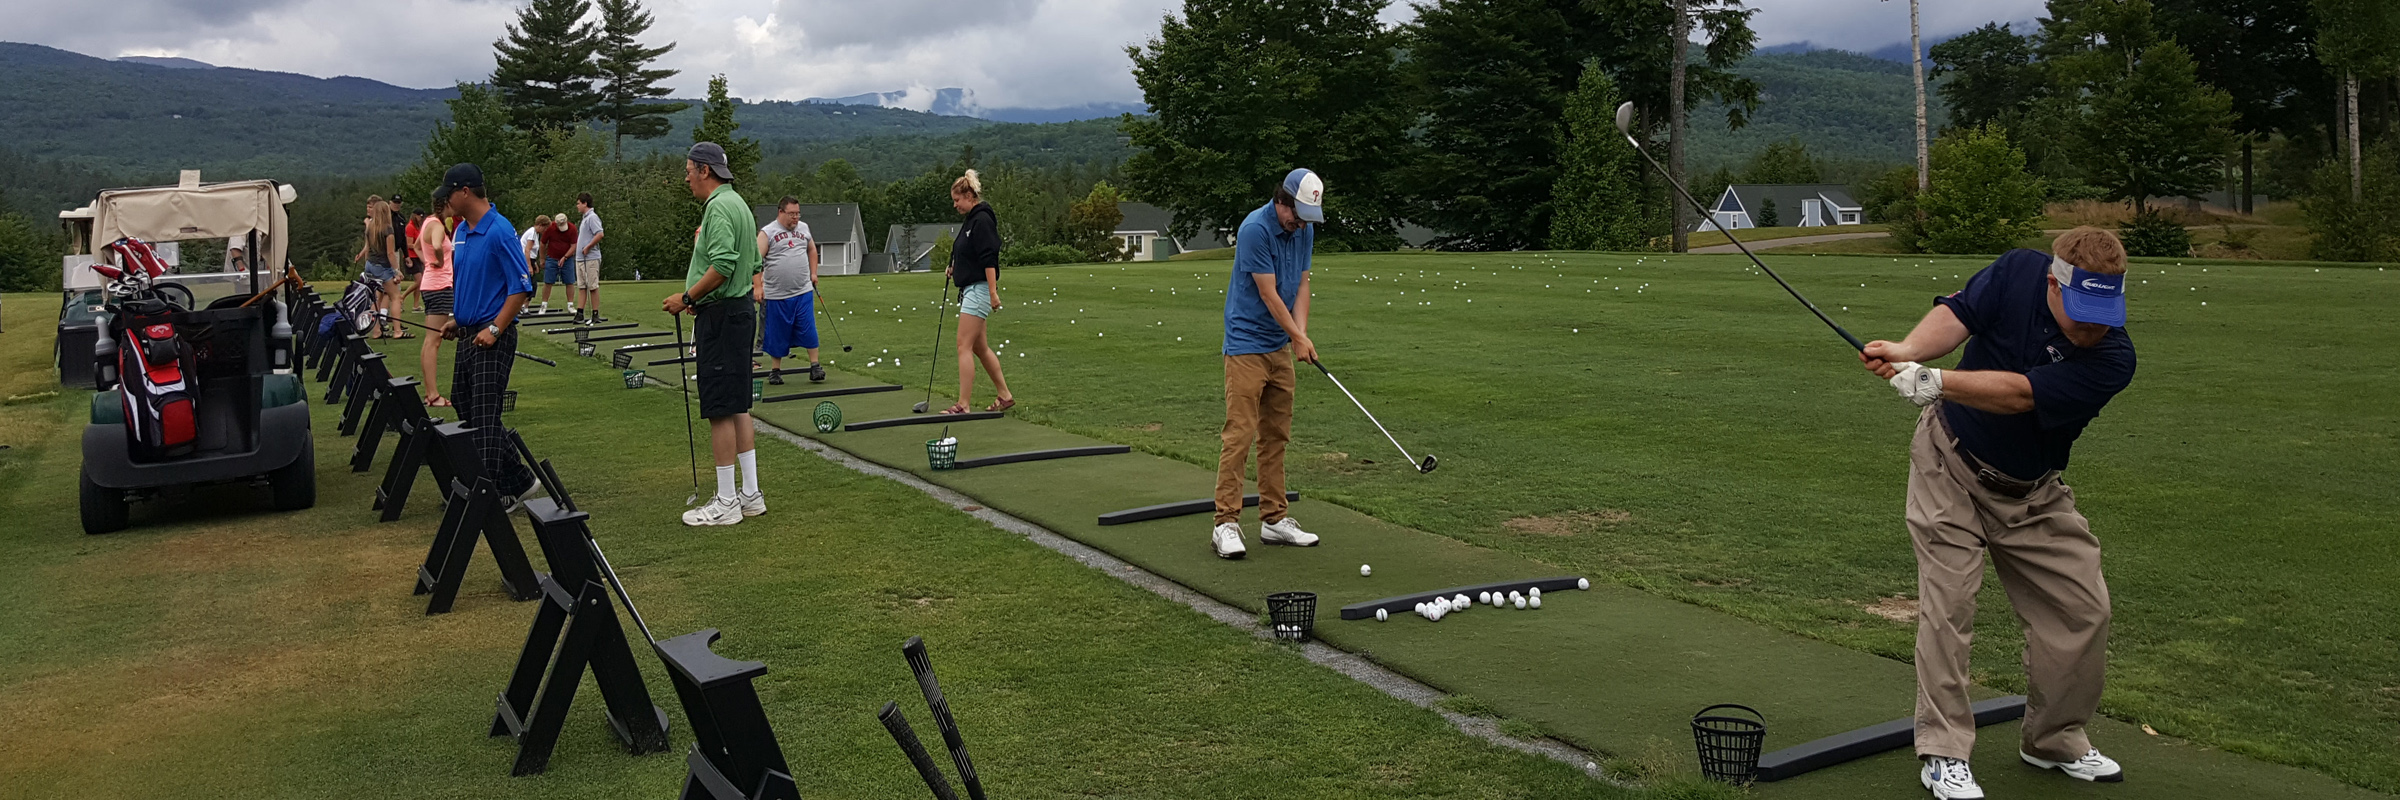 A group of individuals practicing on the driving range at the golf course.